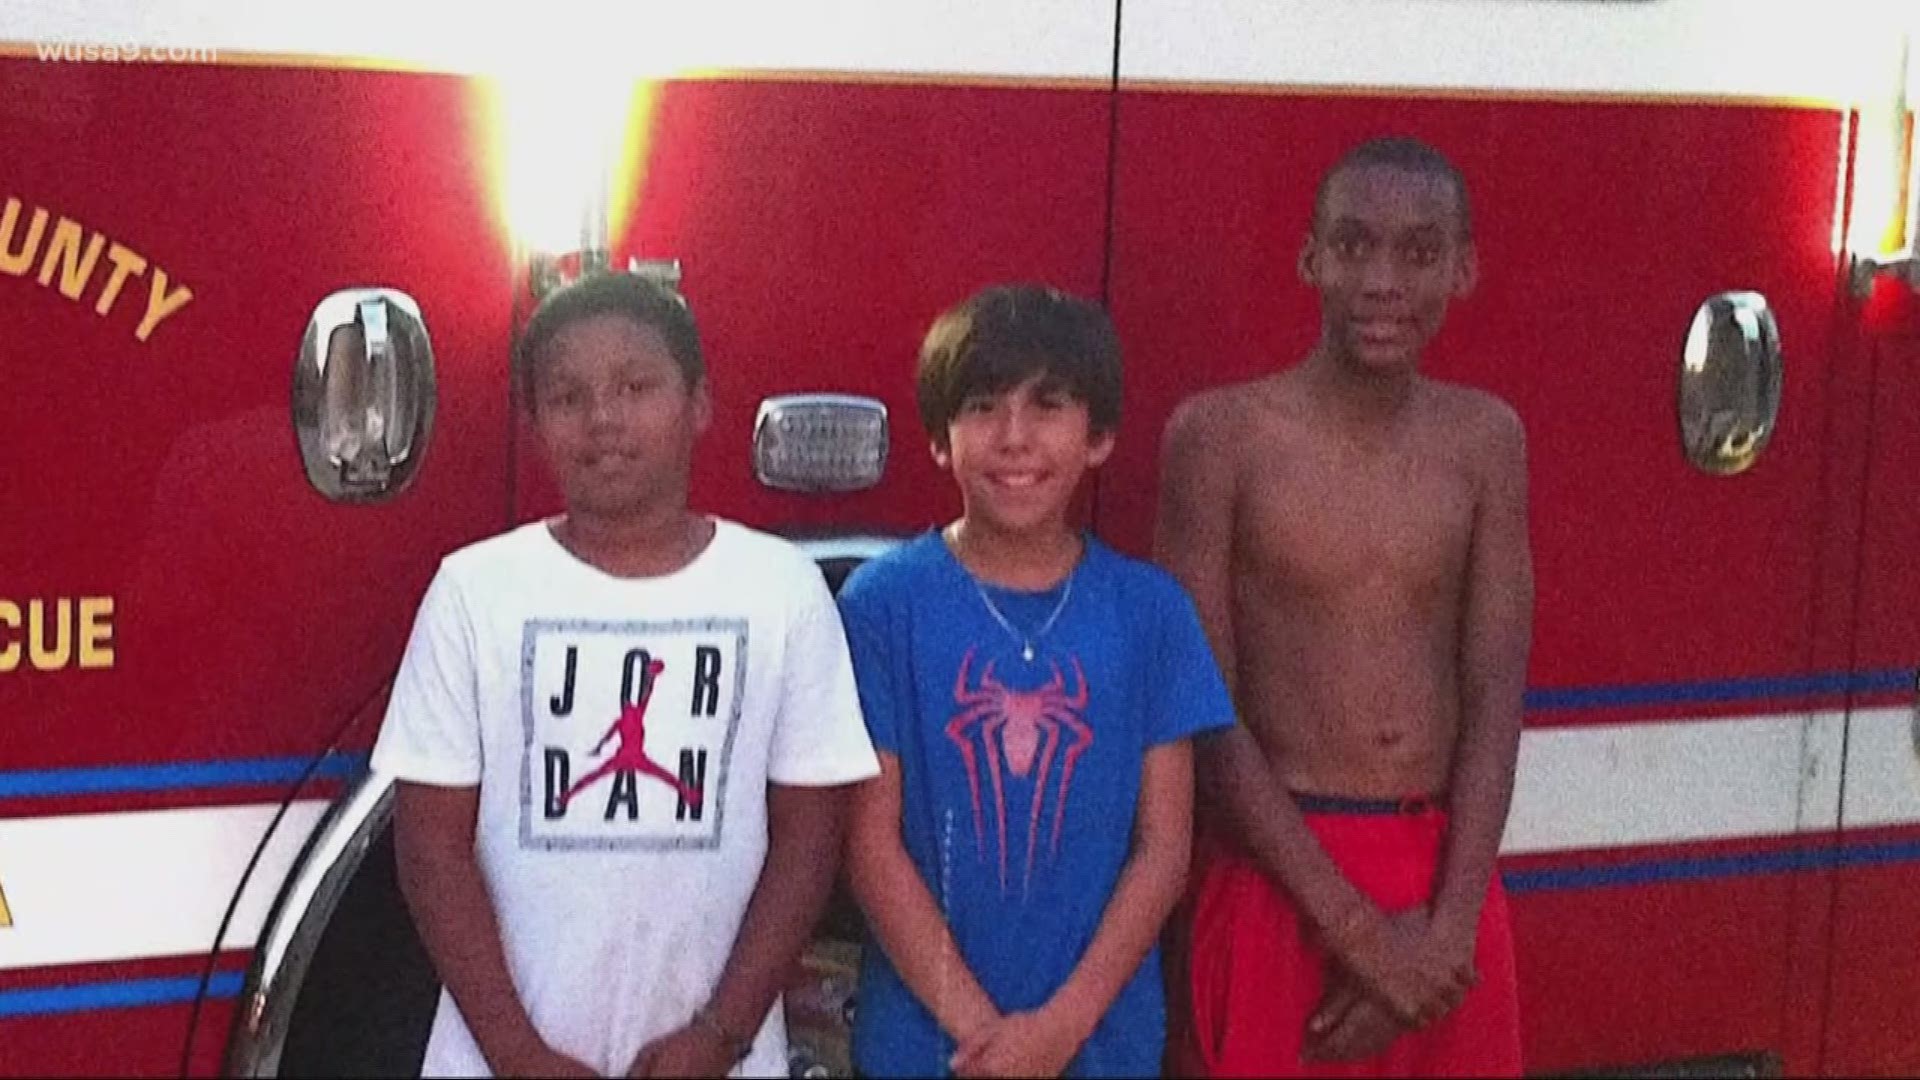 Last summer, the deck to a Stafford, VA townhouse caught fire. To the homeowner's surprise, they ran outside to find three random boys fighting the flames.